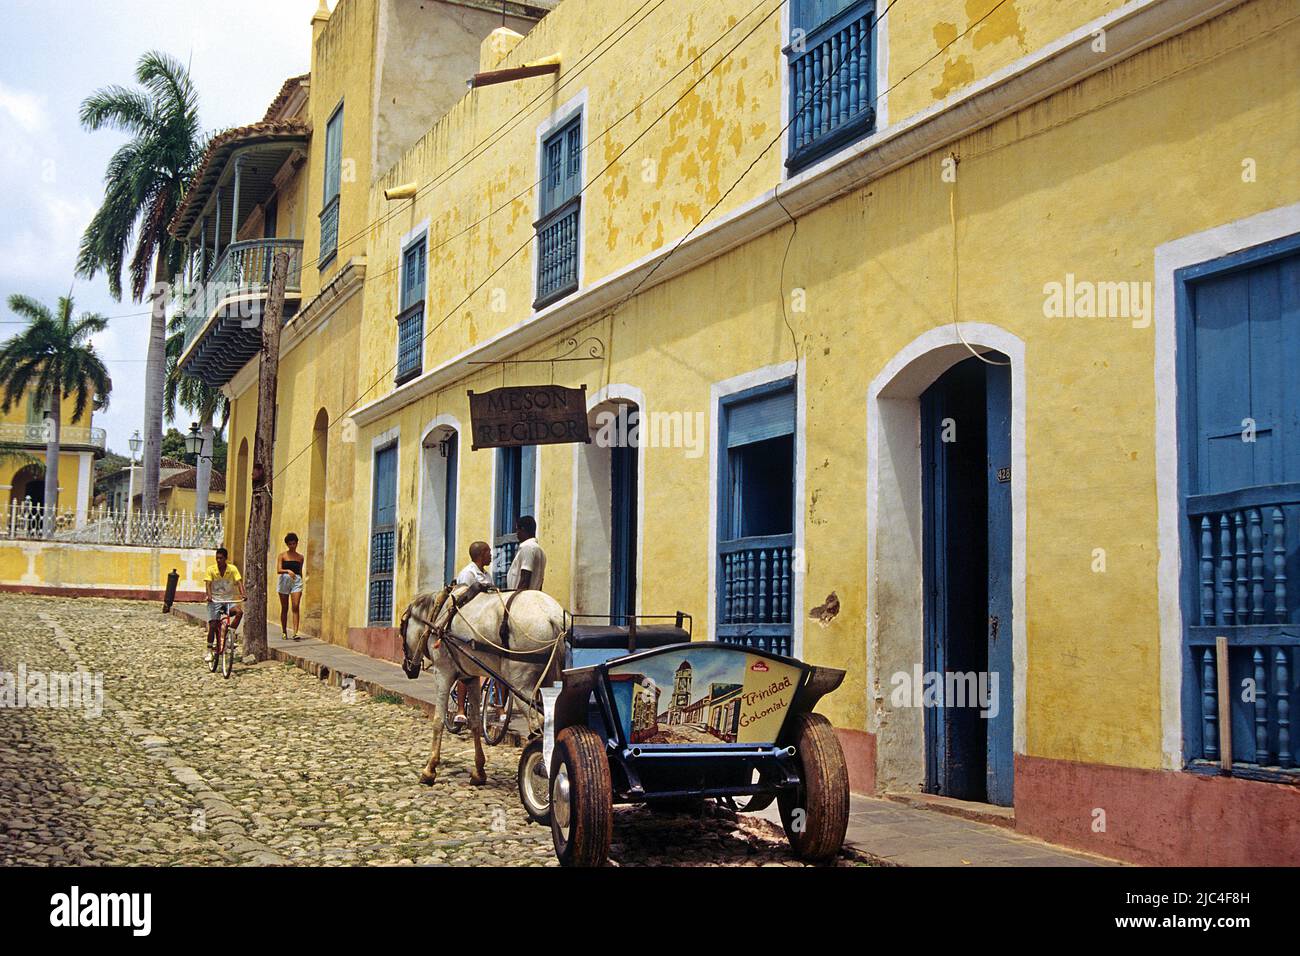 Horse-drawn carriage in a alley with cobblestone, Trinidad, Unesco World Heritage Site, Cuba, Caribbean Stock Photo